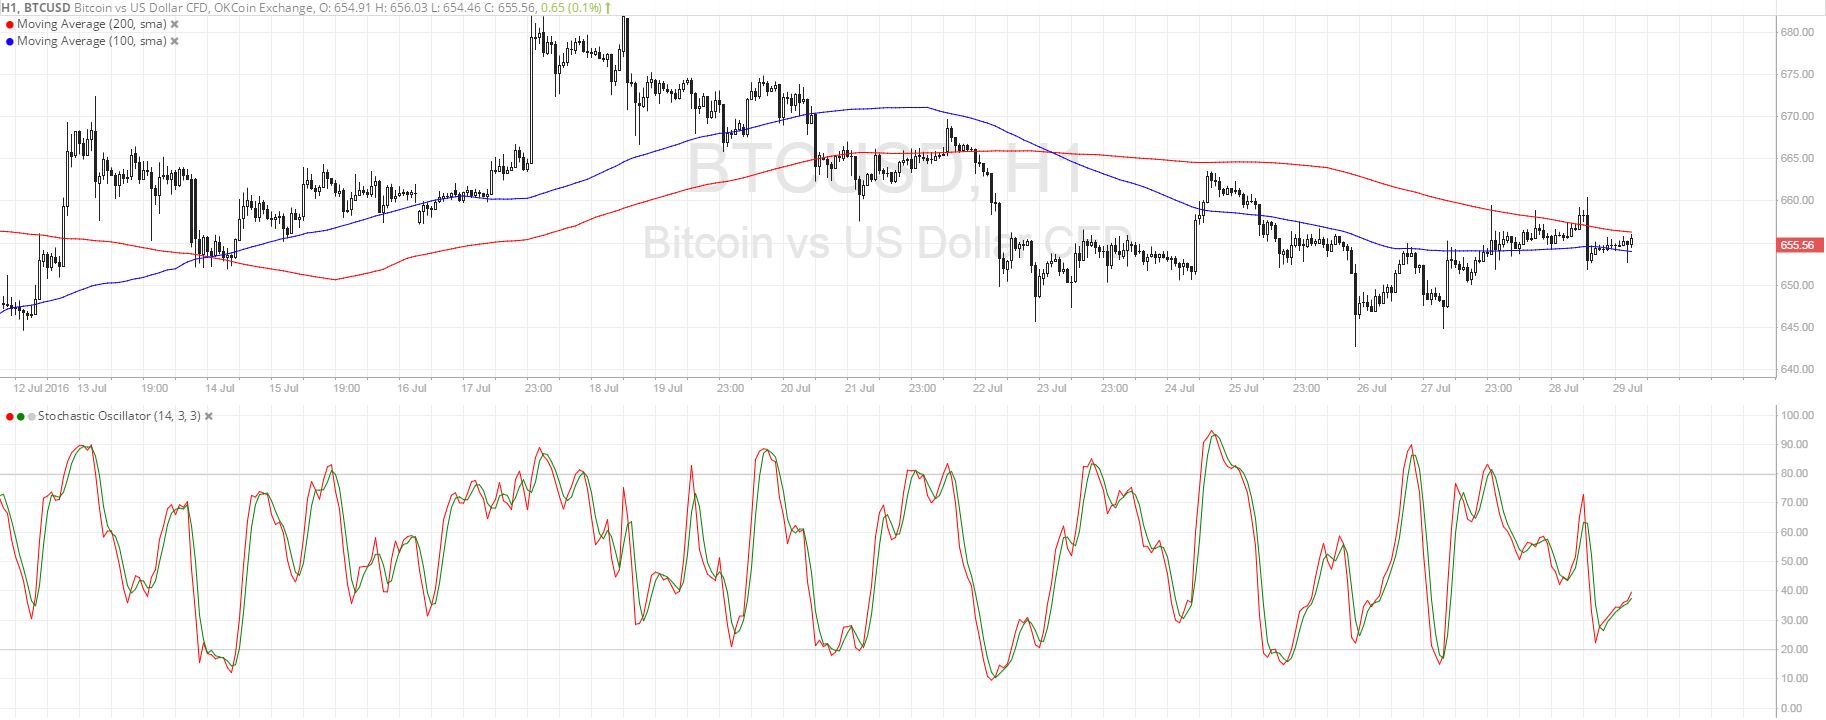 Bitcoin Price Technical Analysis for 07/29/2016 - Potential Reversal?